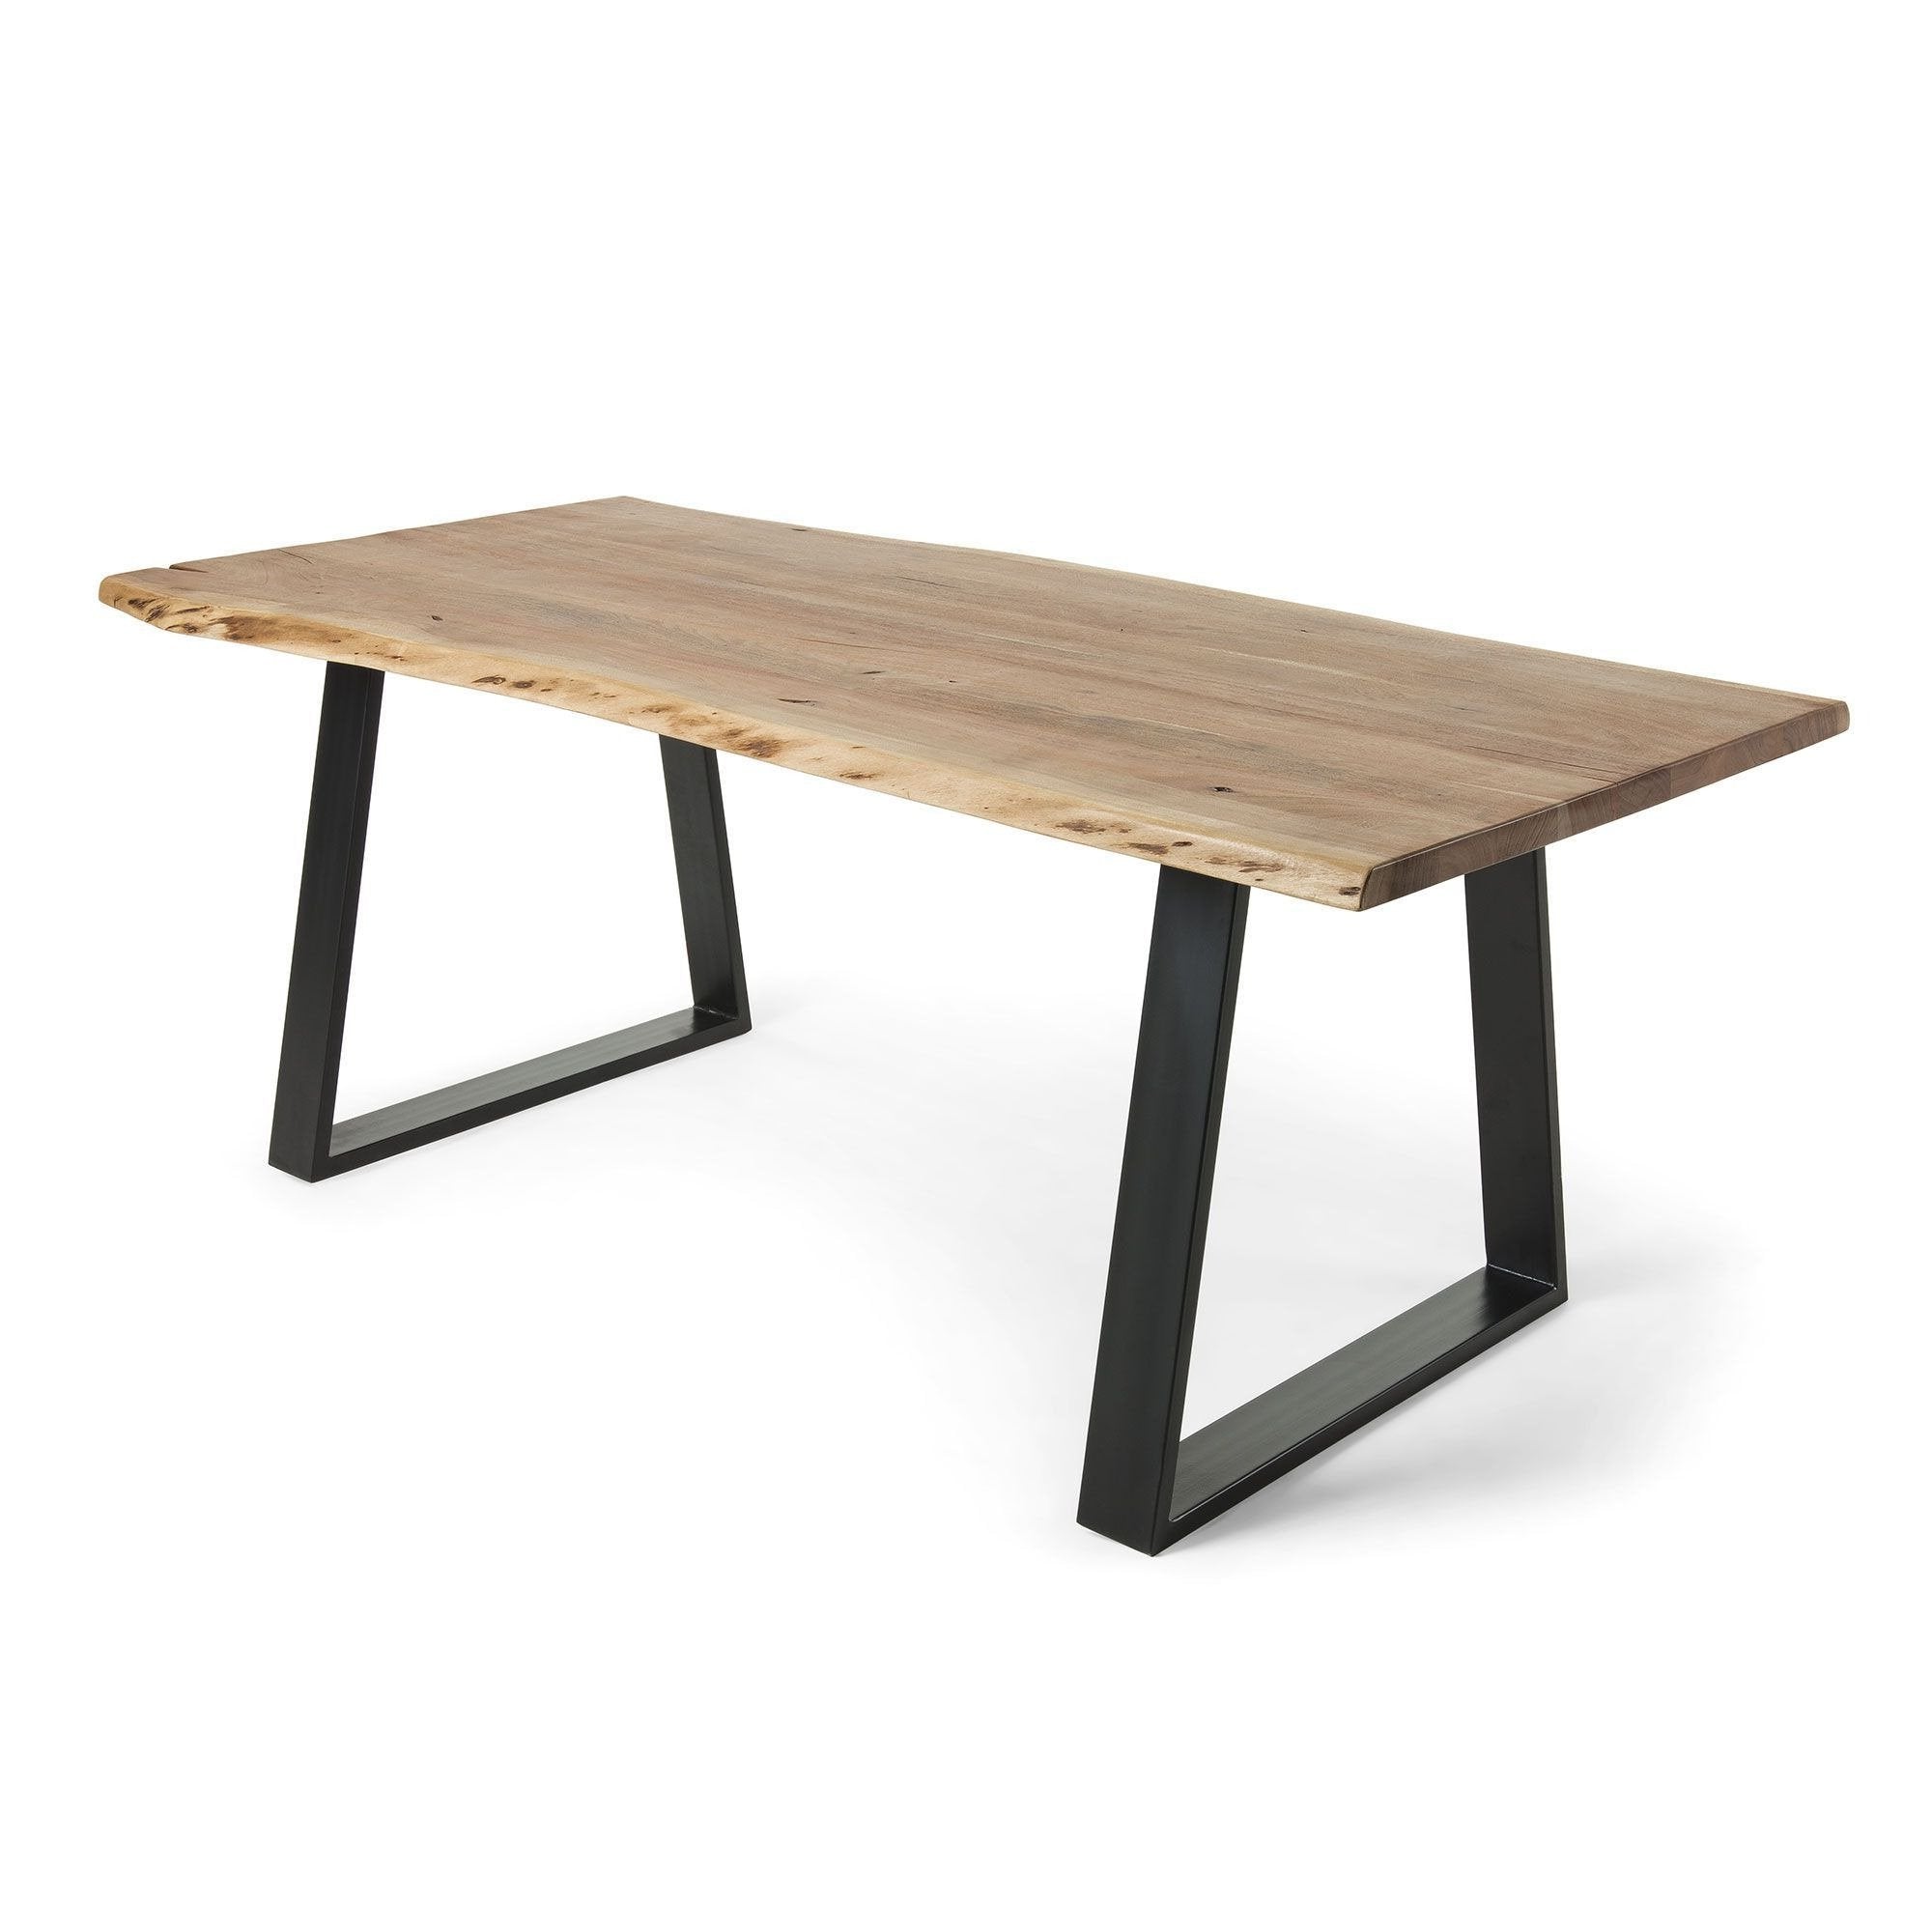 Fono 2m Solid Wattle Timber Dining Table - Natural - Dining Tables